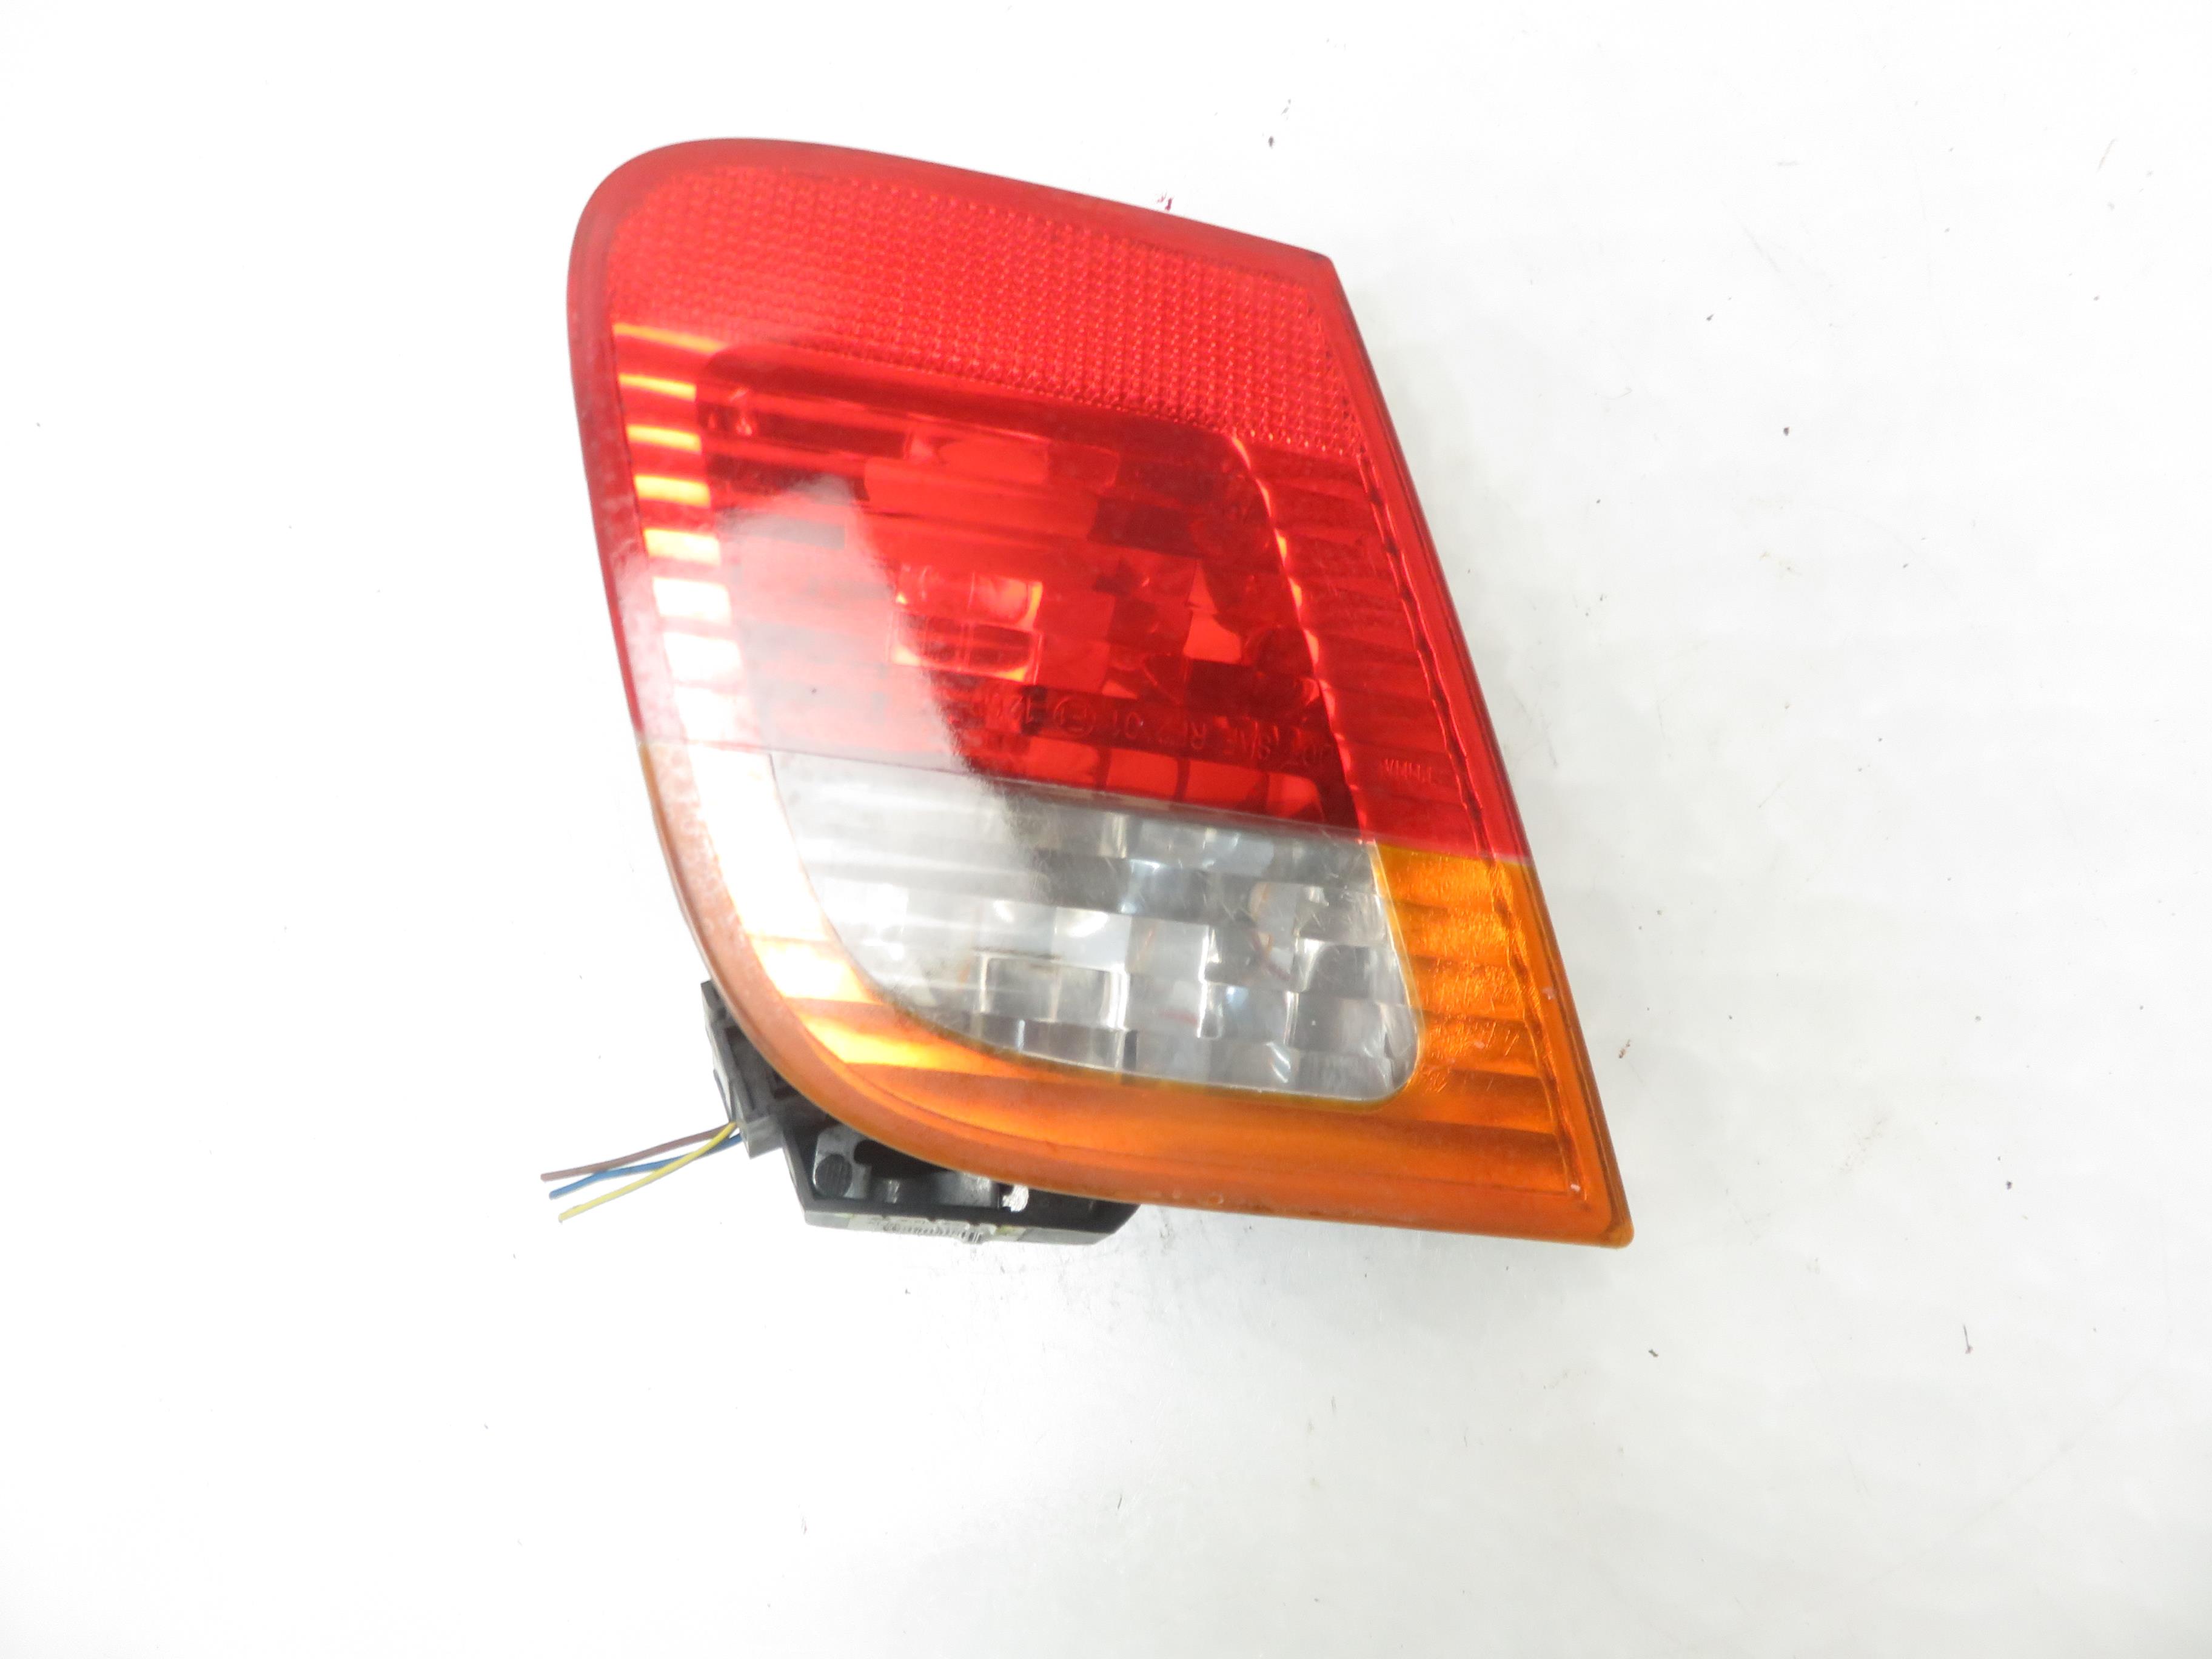 BMW 3 Series E46 (1997-2006) Rear Left Taillight 6907945, 6907937 23129843